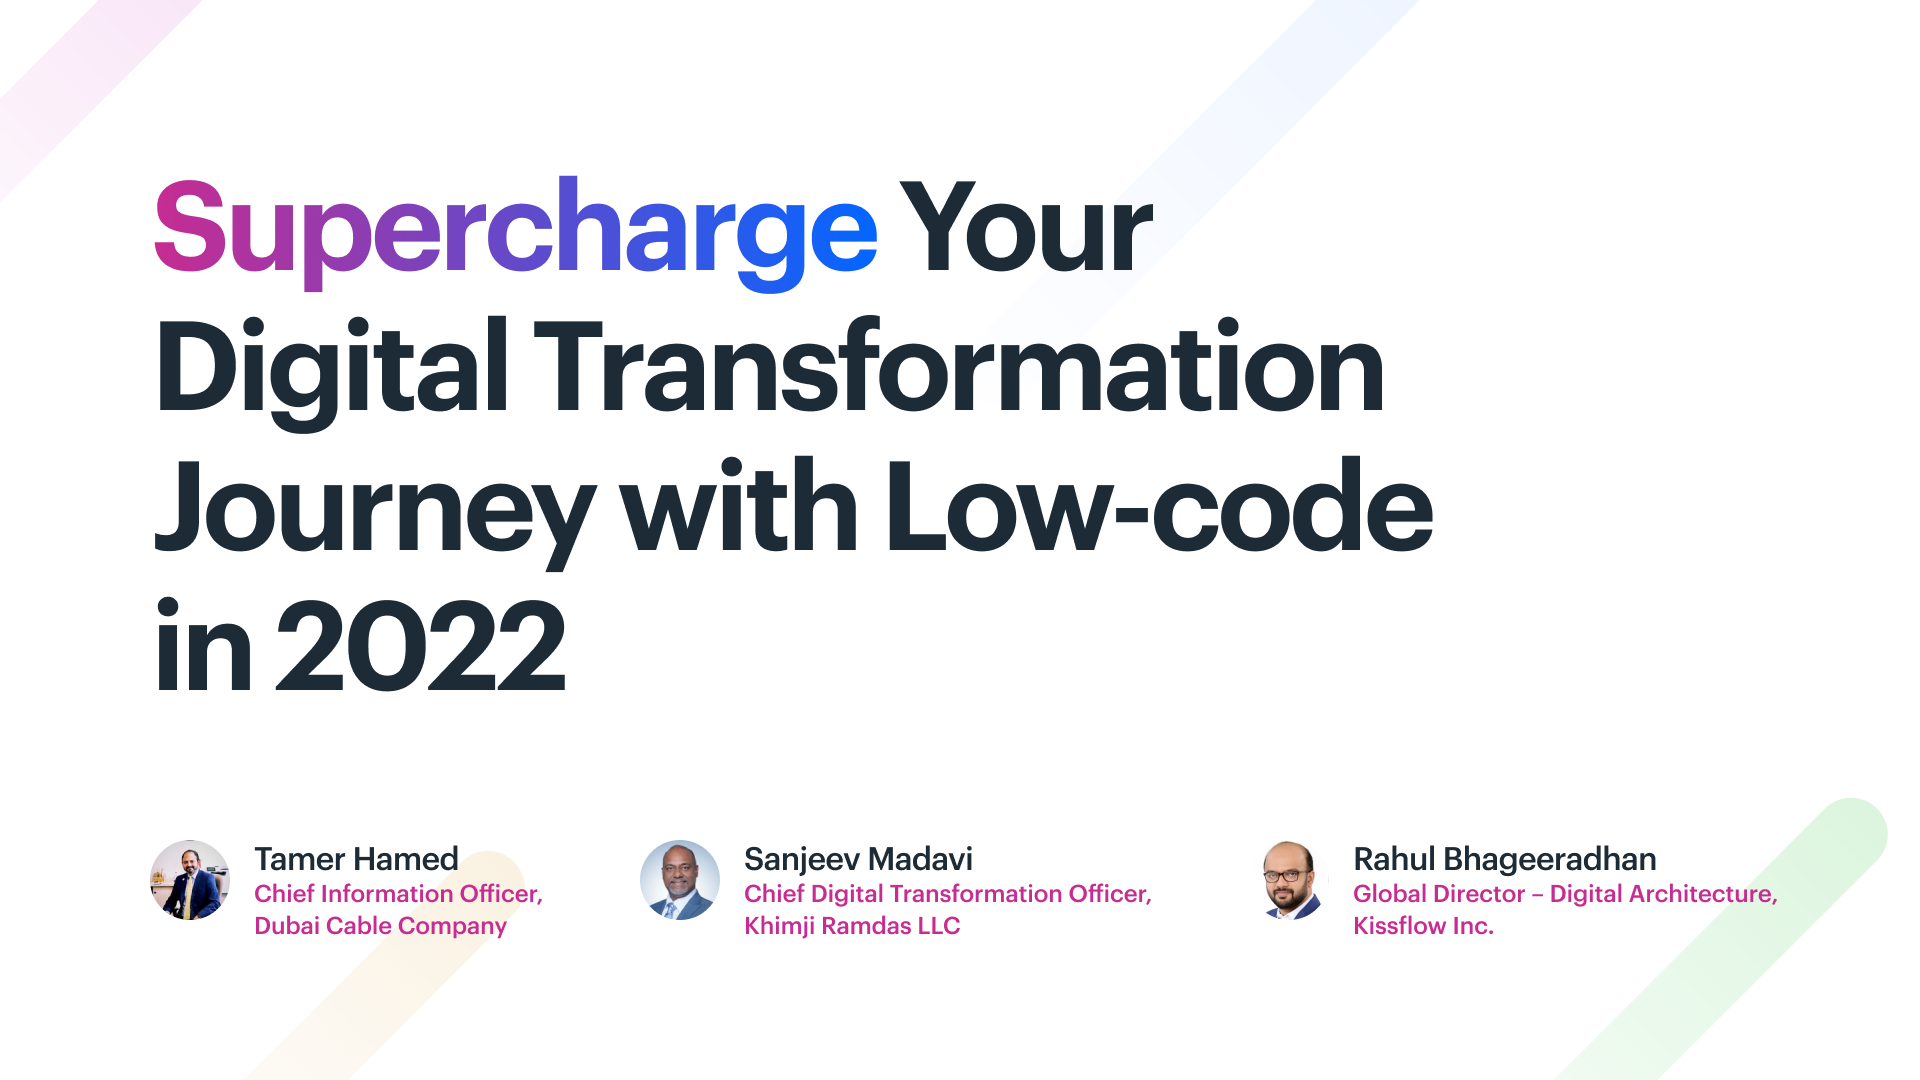 Supercharge Your Digital Transformation Journey with Low-code in 2022